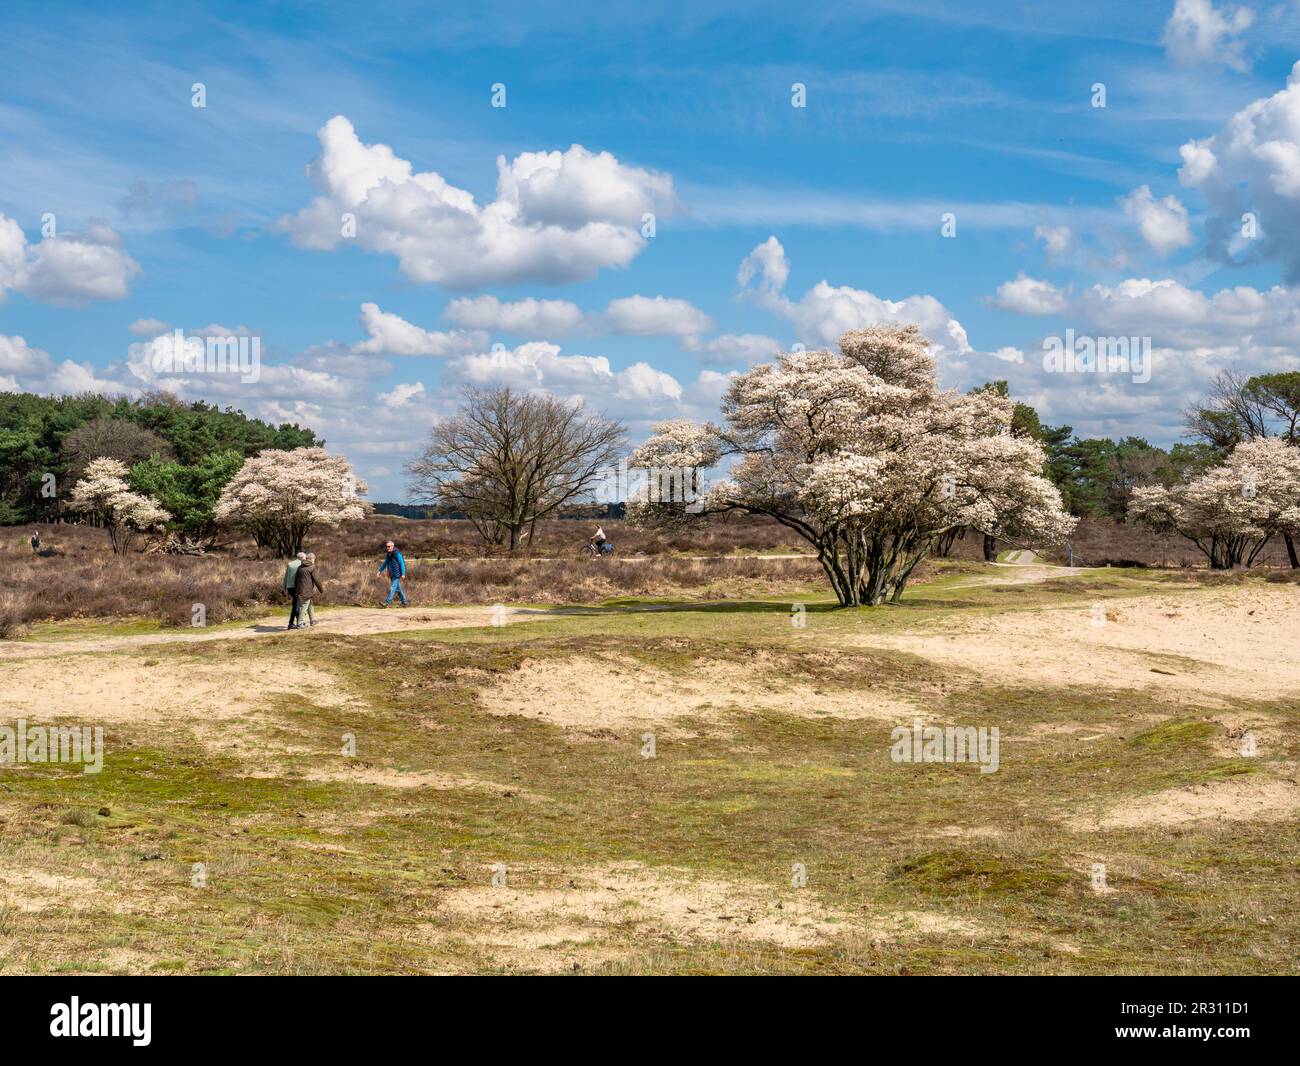 People walking and riding bicycles, blooming juneberry trees, Amelanchier lamarkii, in Zuiderheide nature reserve, Het Gooi, Netherlands Stock Photo